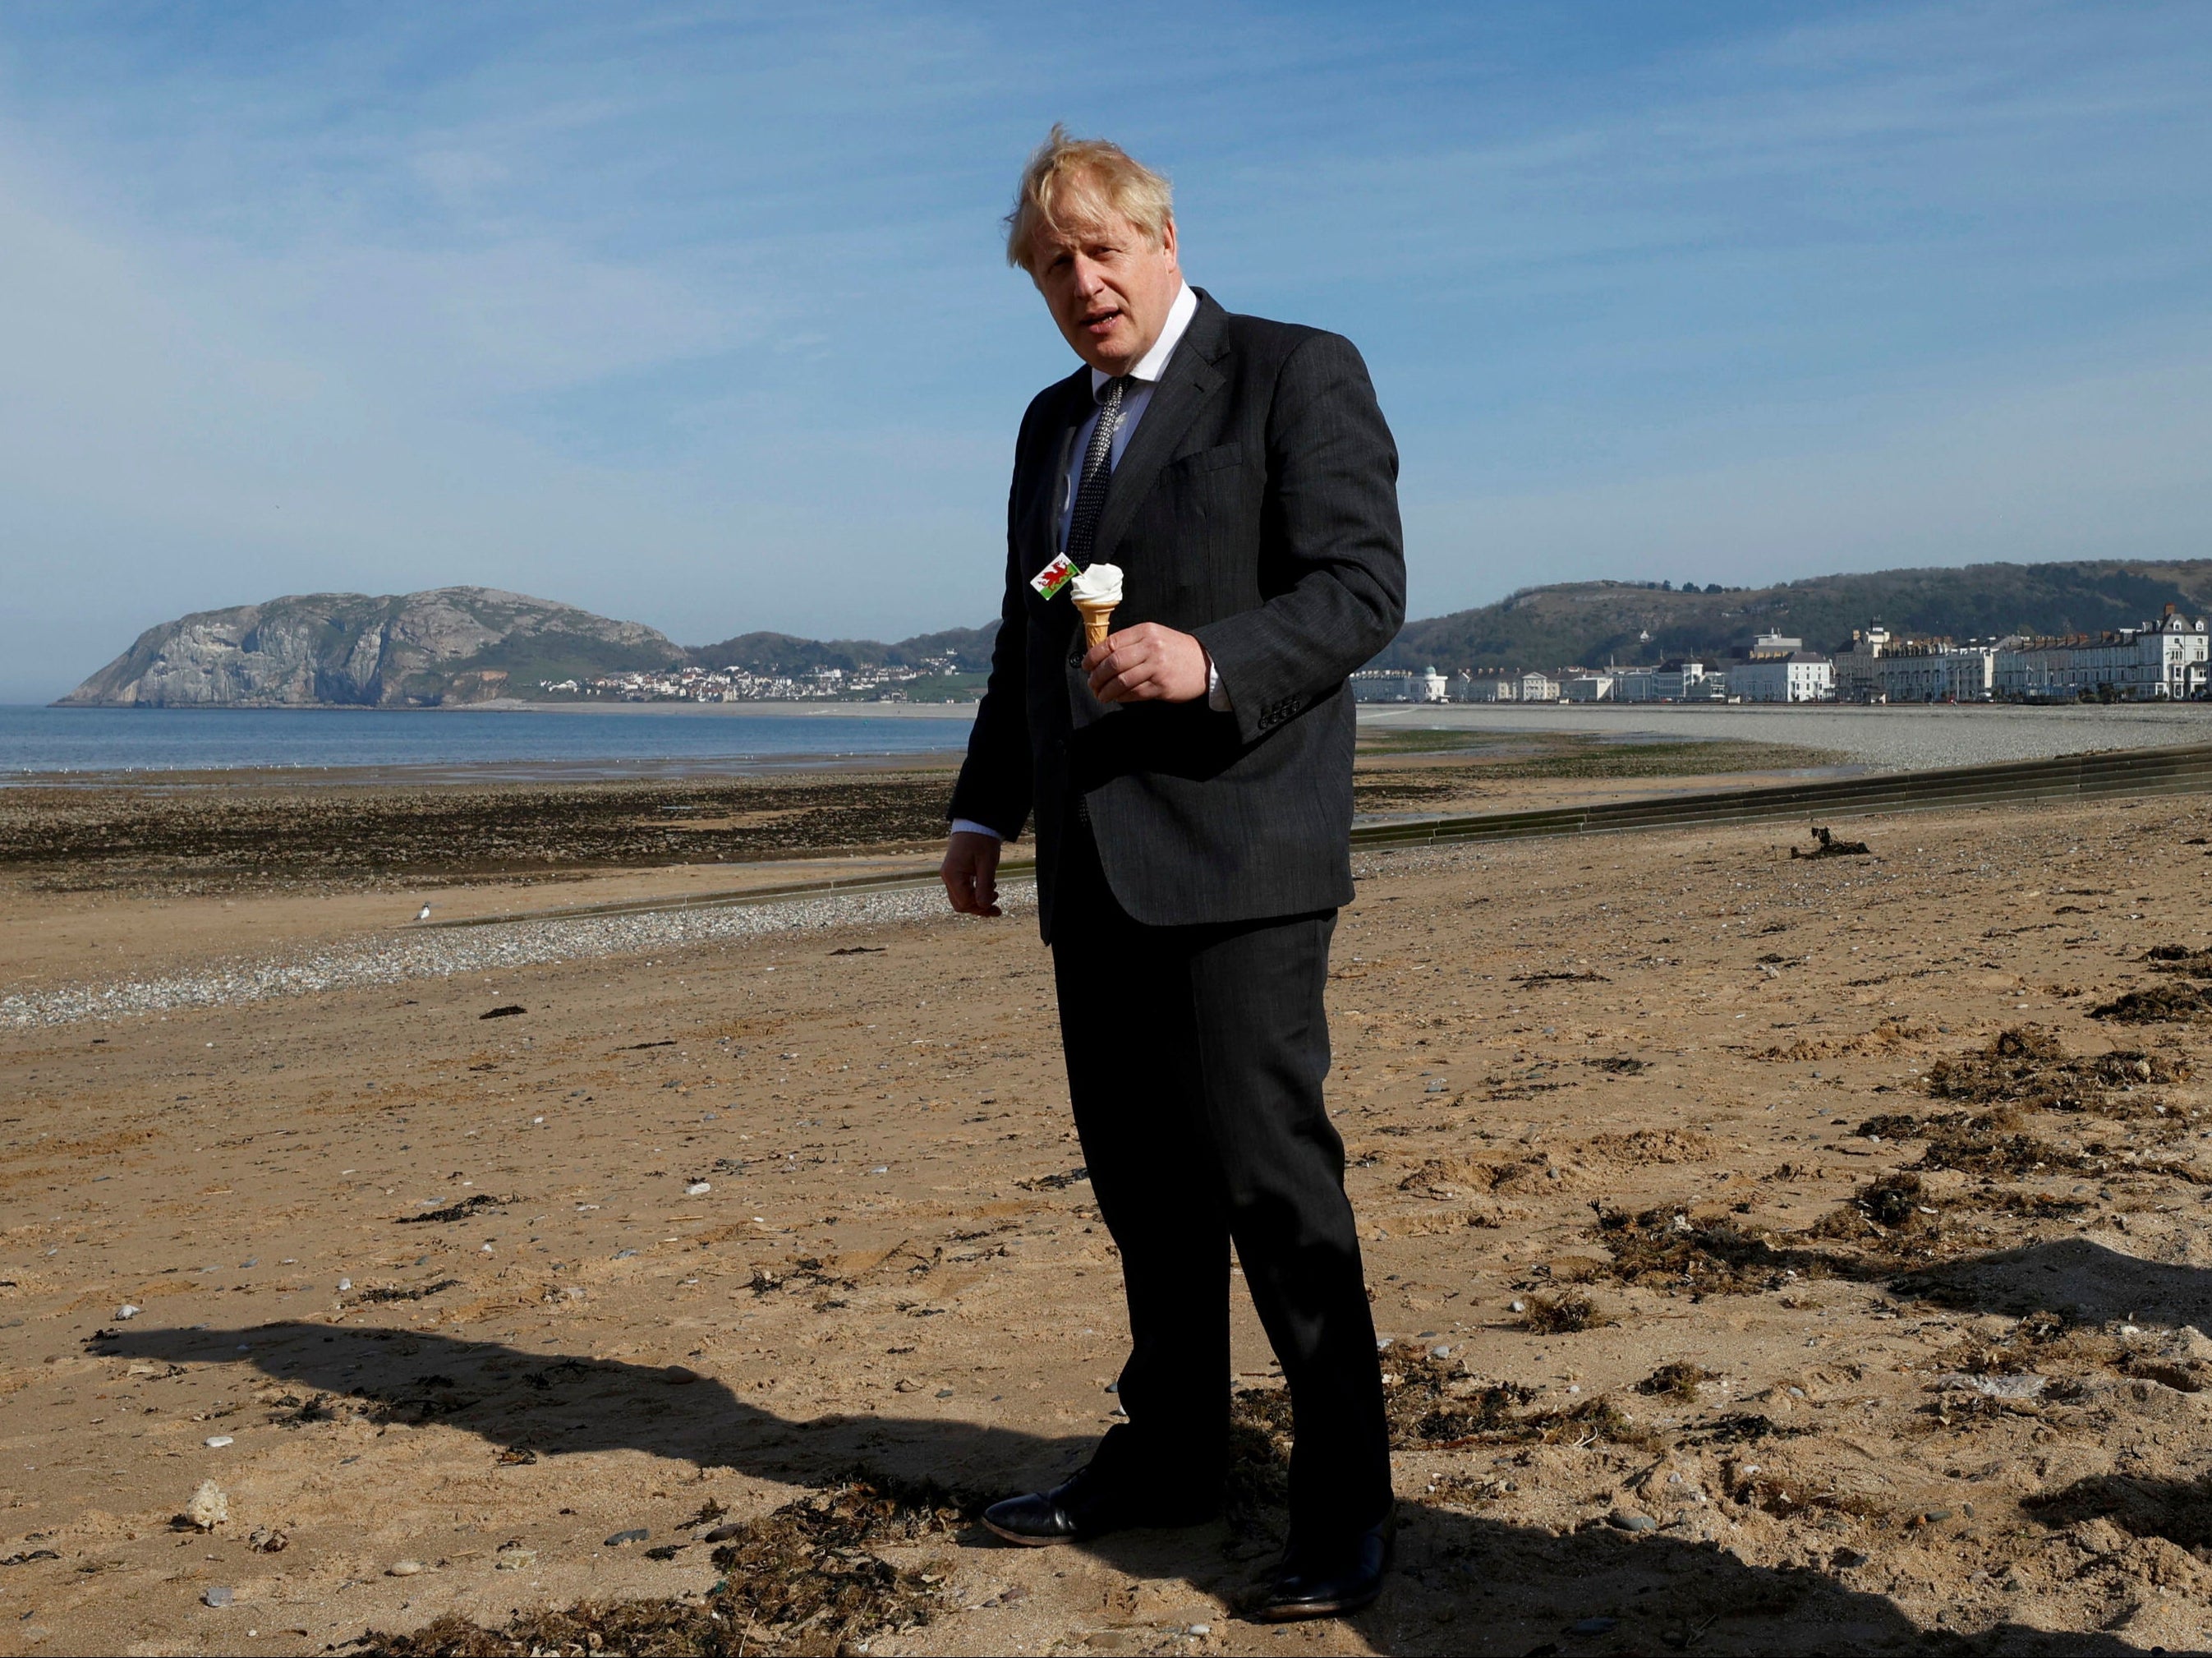 Boris Johnson has faced questions over his conduct in recent days